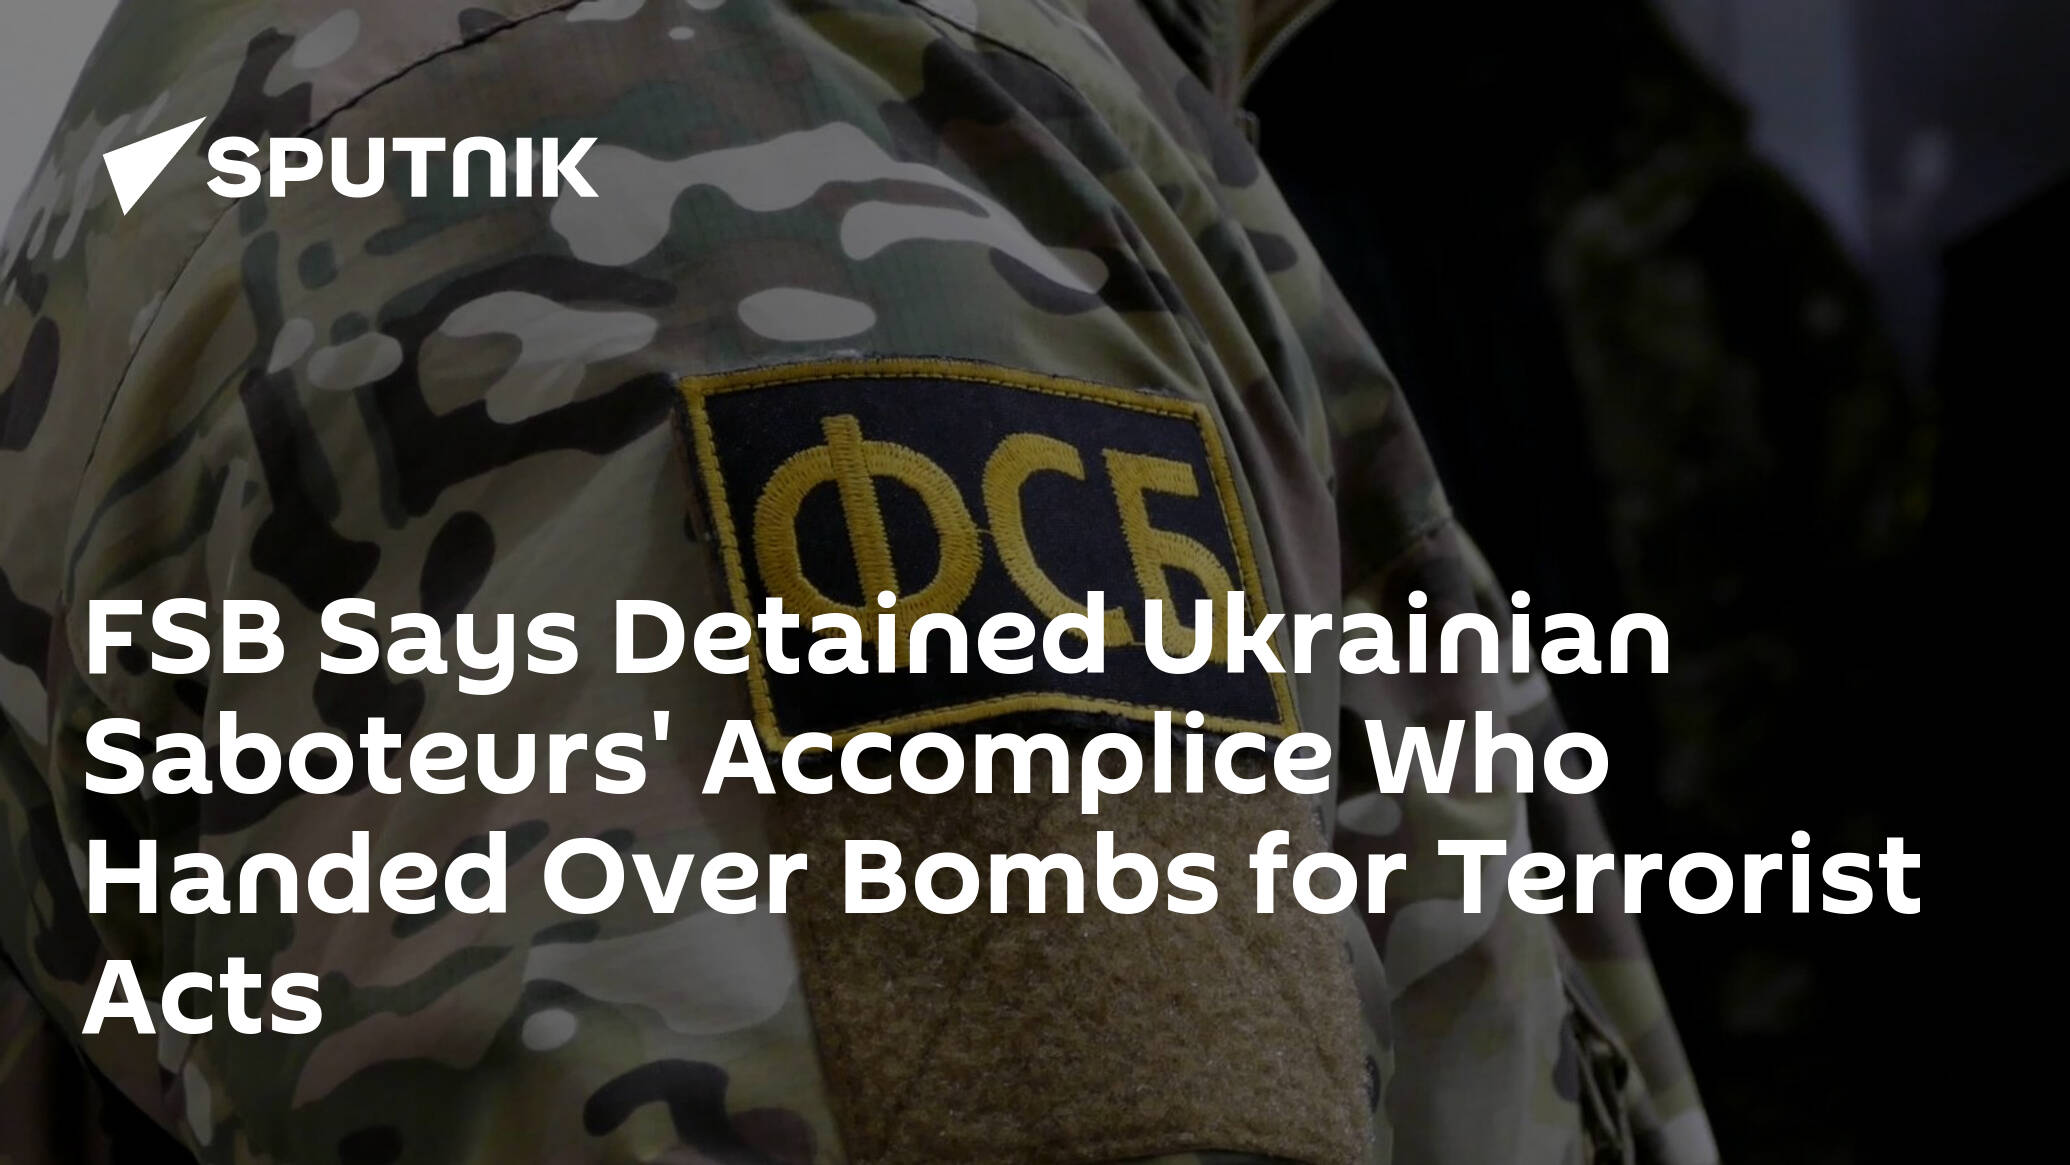 FSB Says Detained Ukrainian Saboteurs' Accomplice Who Handed Over Bombs for Terrorist Acts